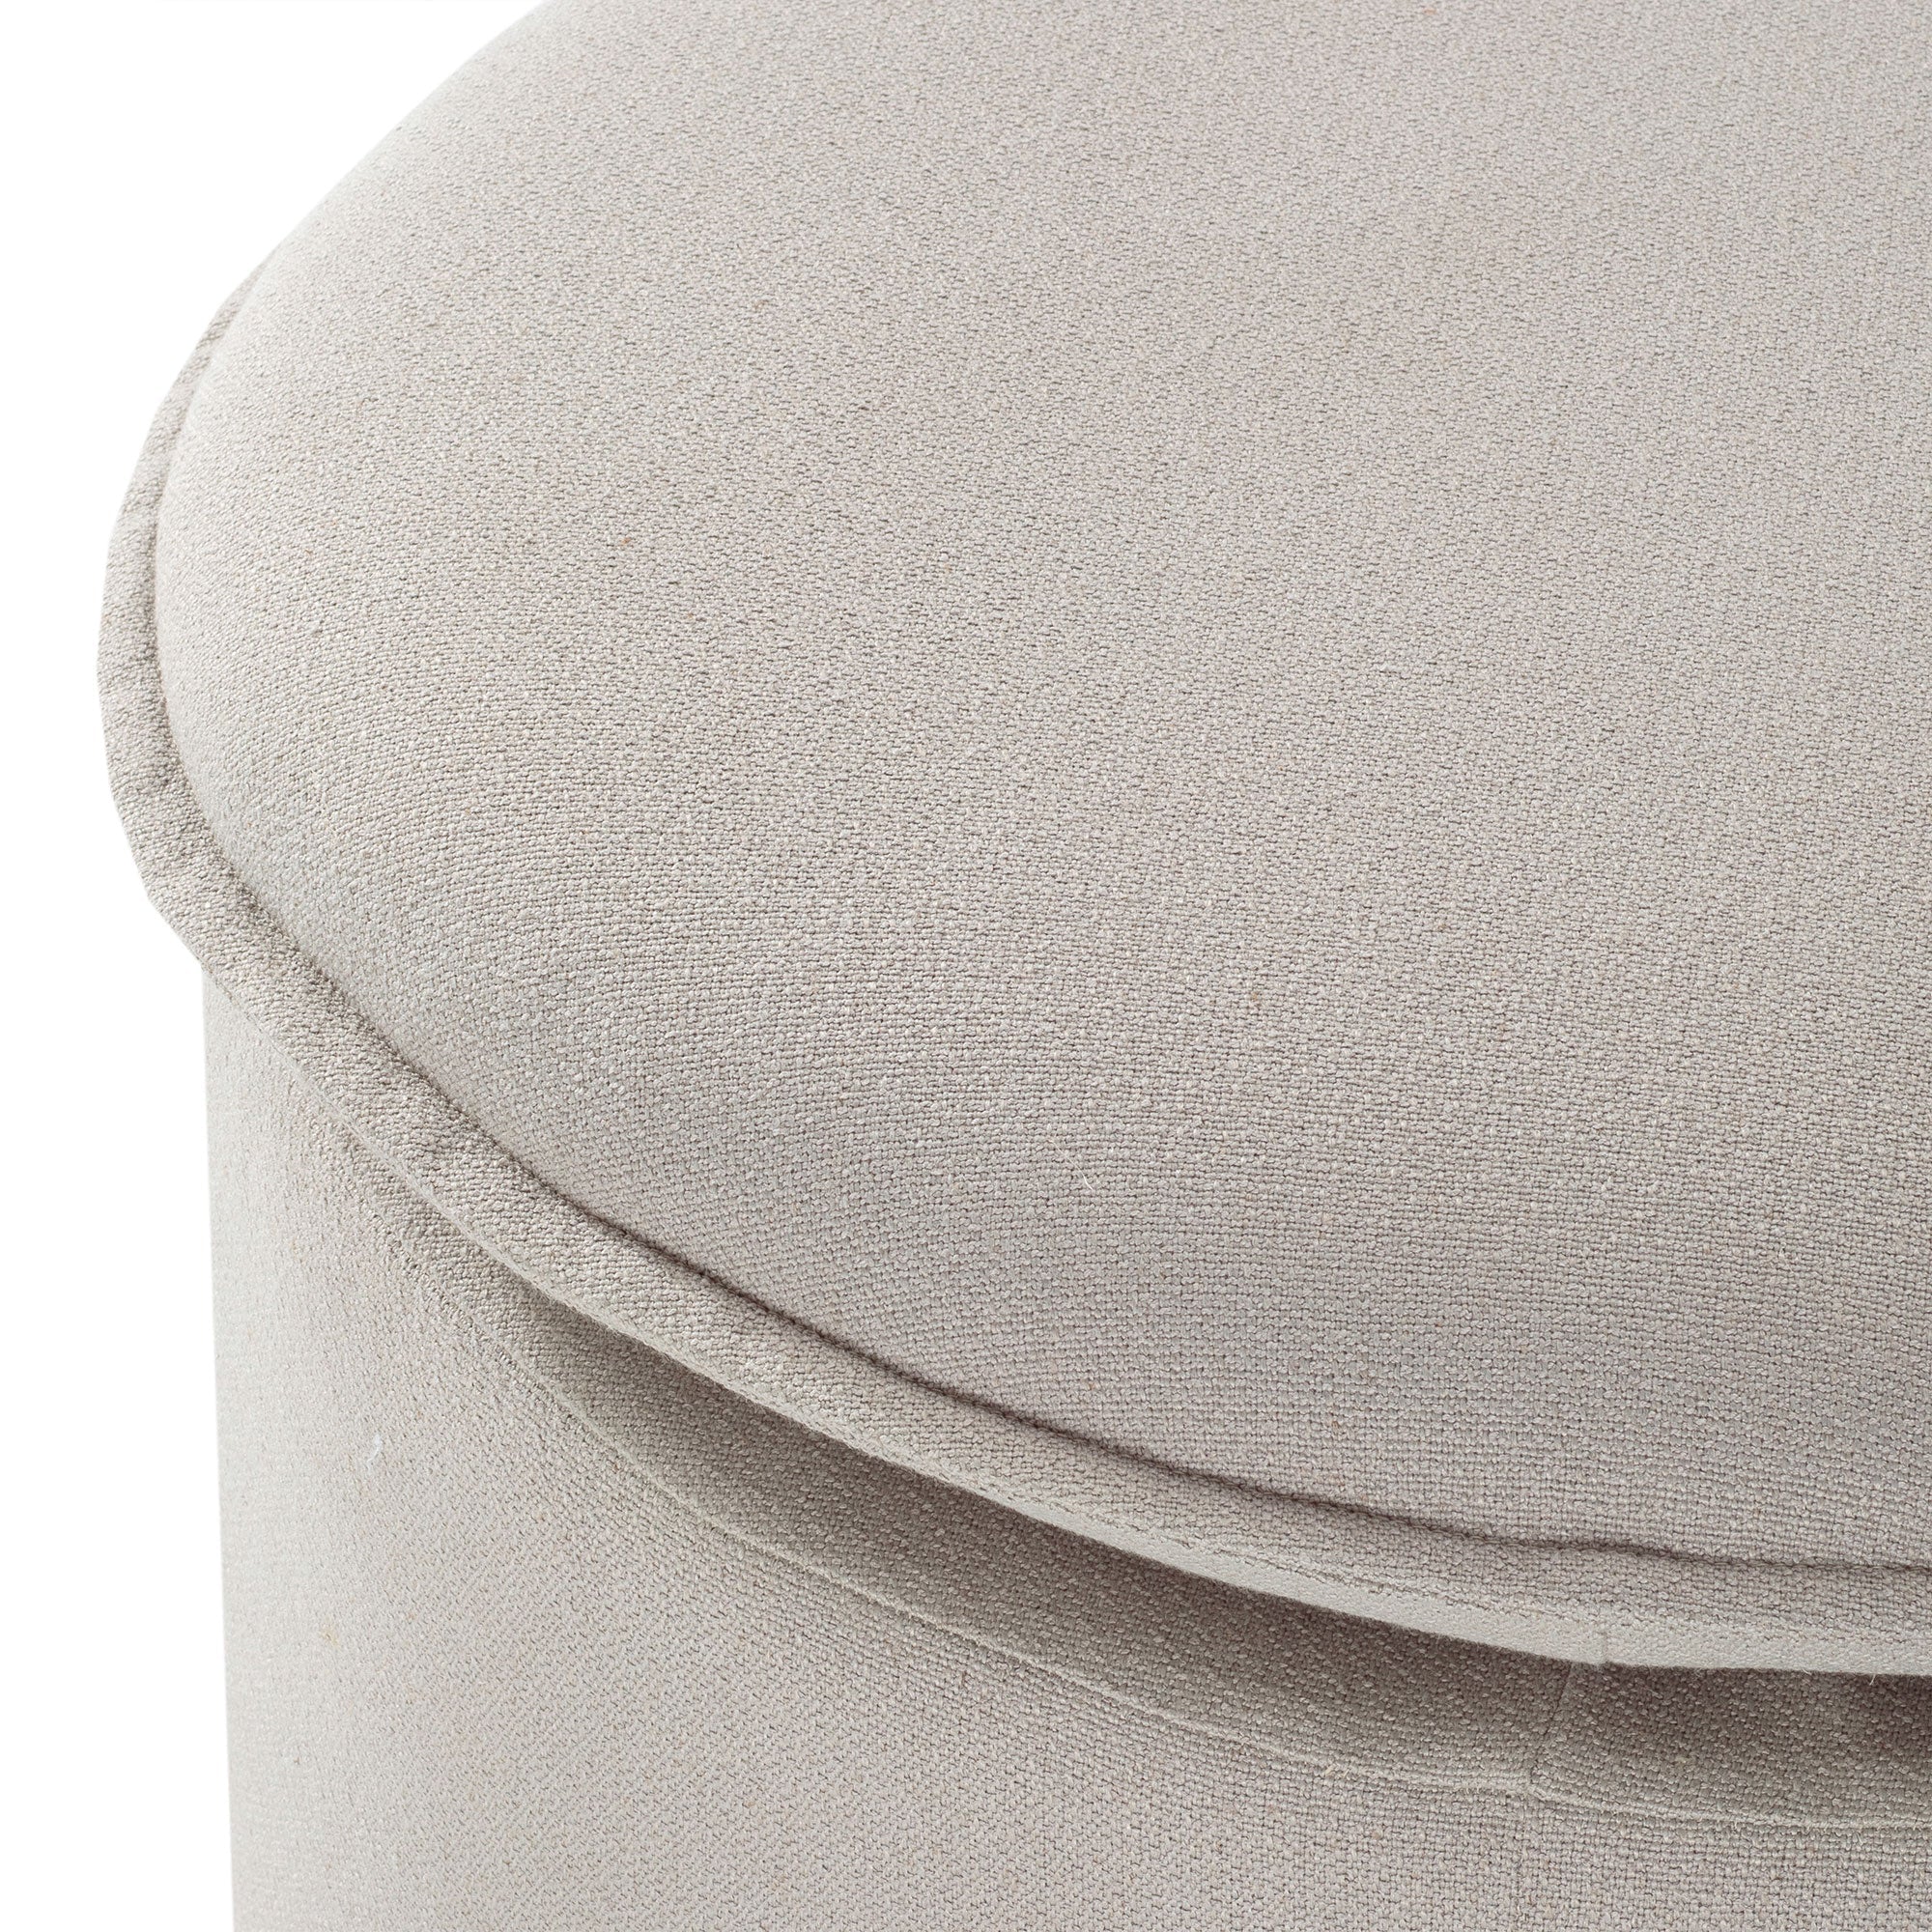 Lyra Organic Ottoman in Dove Fabric Upholstery in Ottomans & Benches by Maven Lane